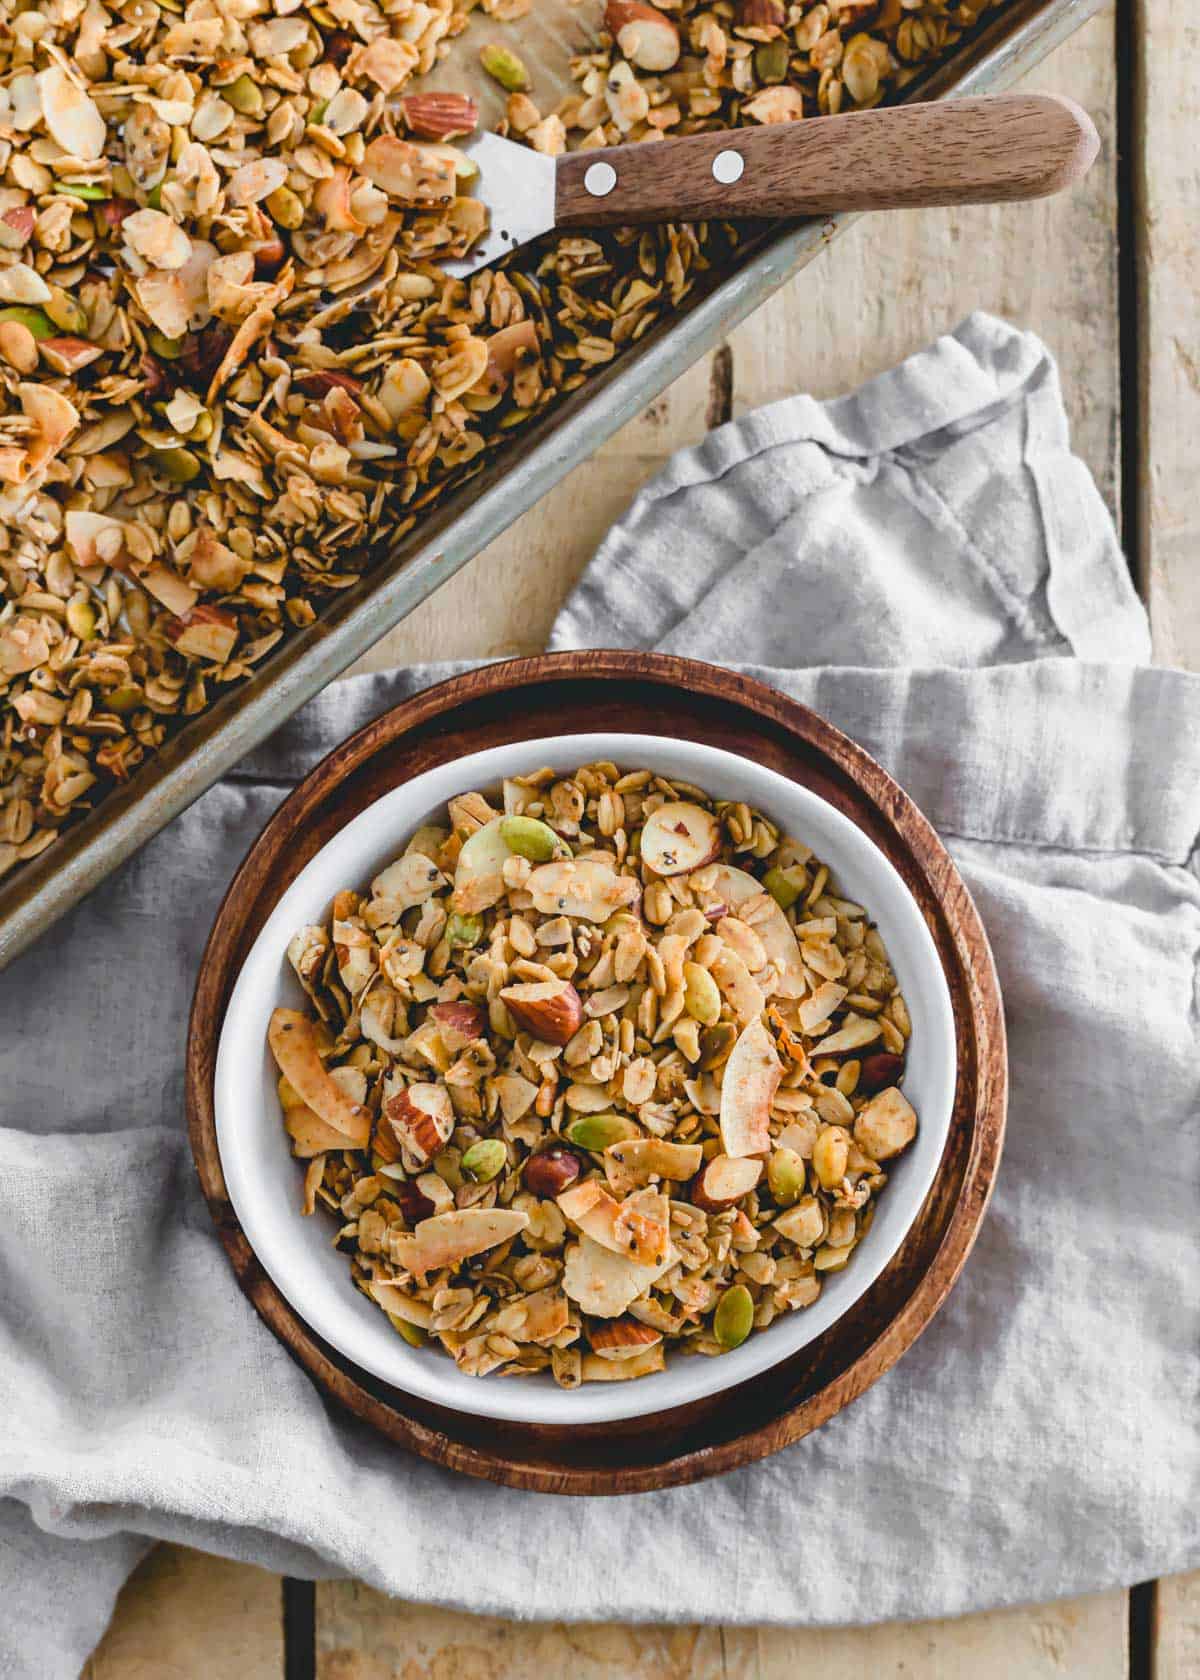 Recipe to make homemade vegan granola with coconut and almonds in a white bowl on a wooden plate.